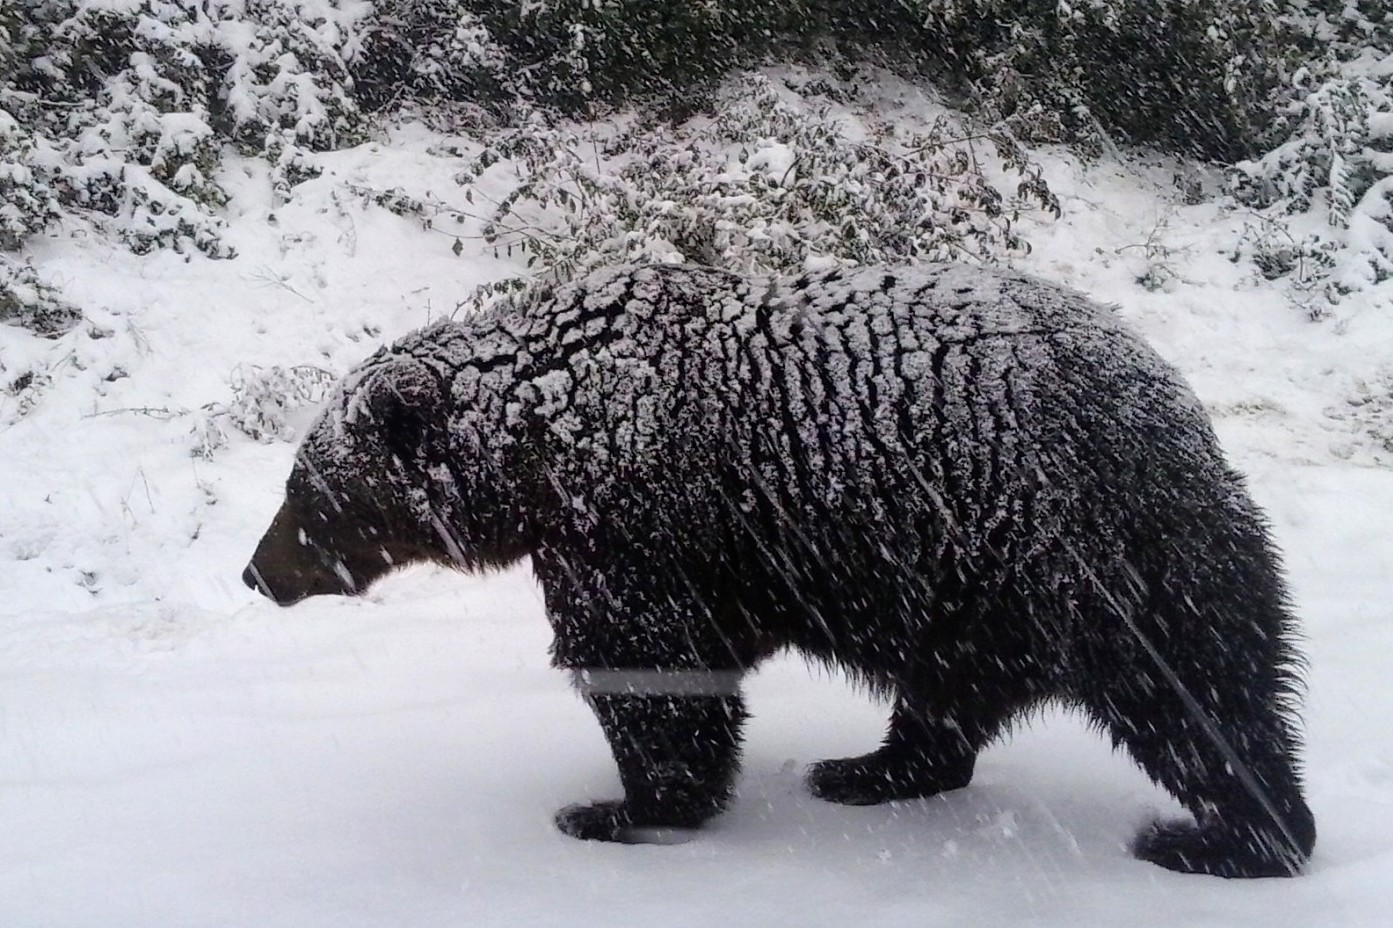 Pictured: A bear at the Romanian sanctuary walking after a snow storm.